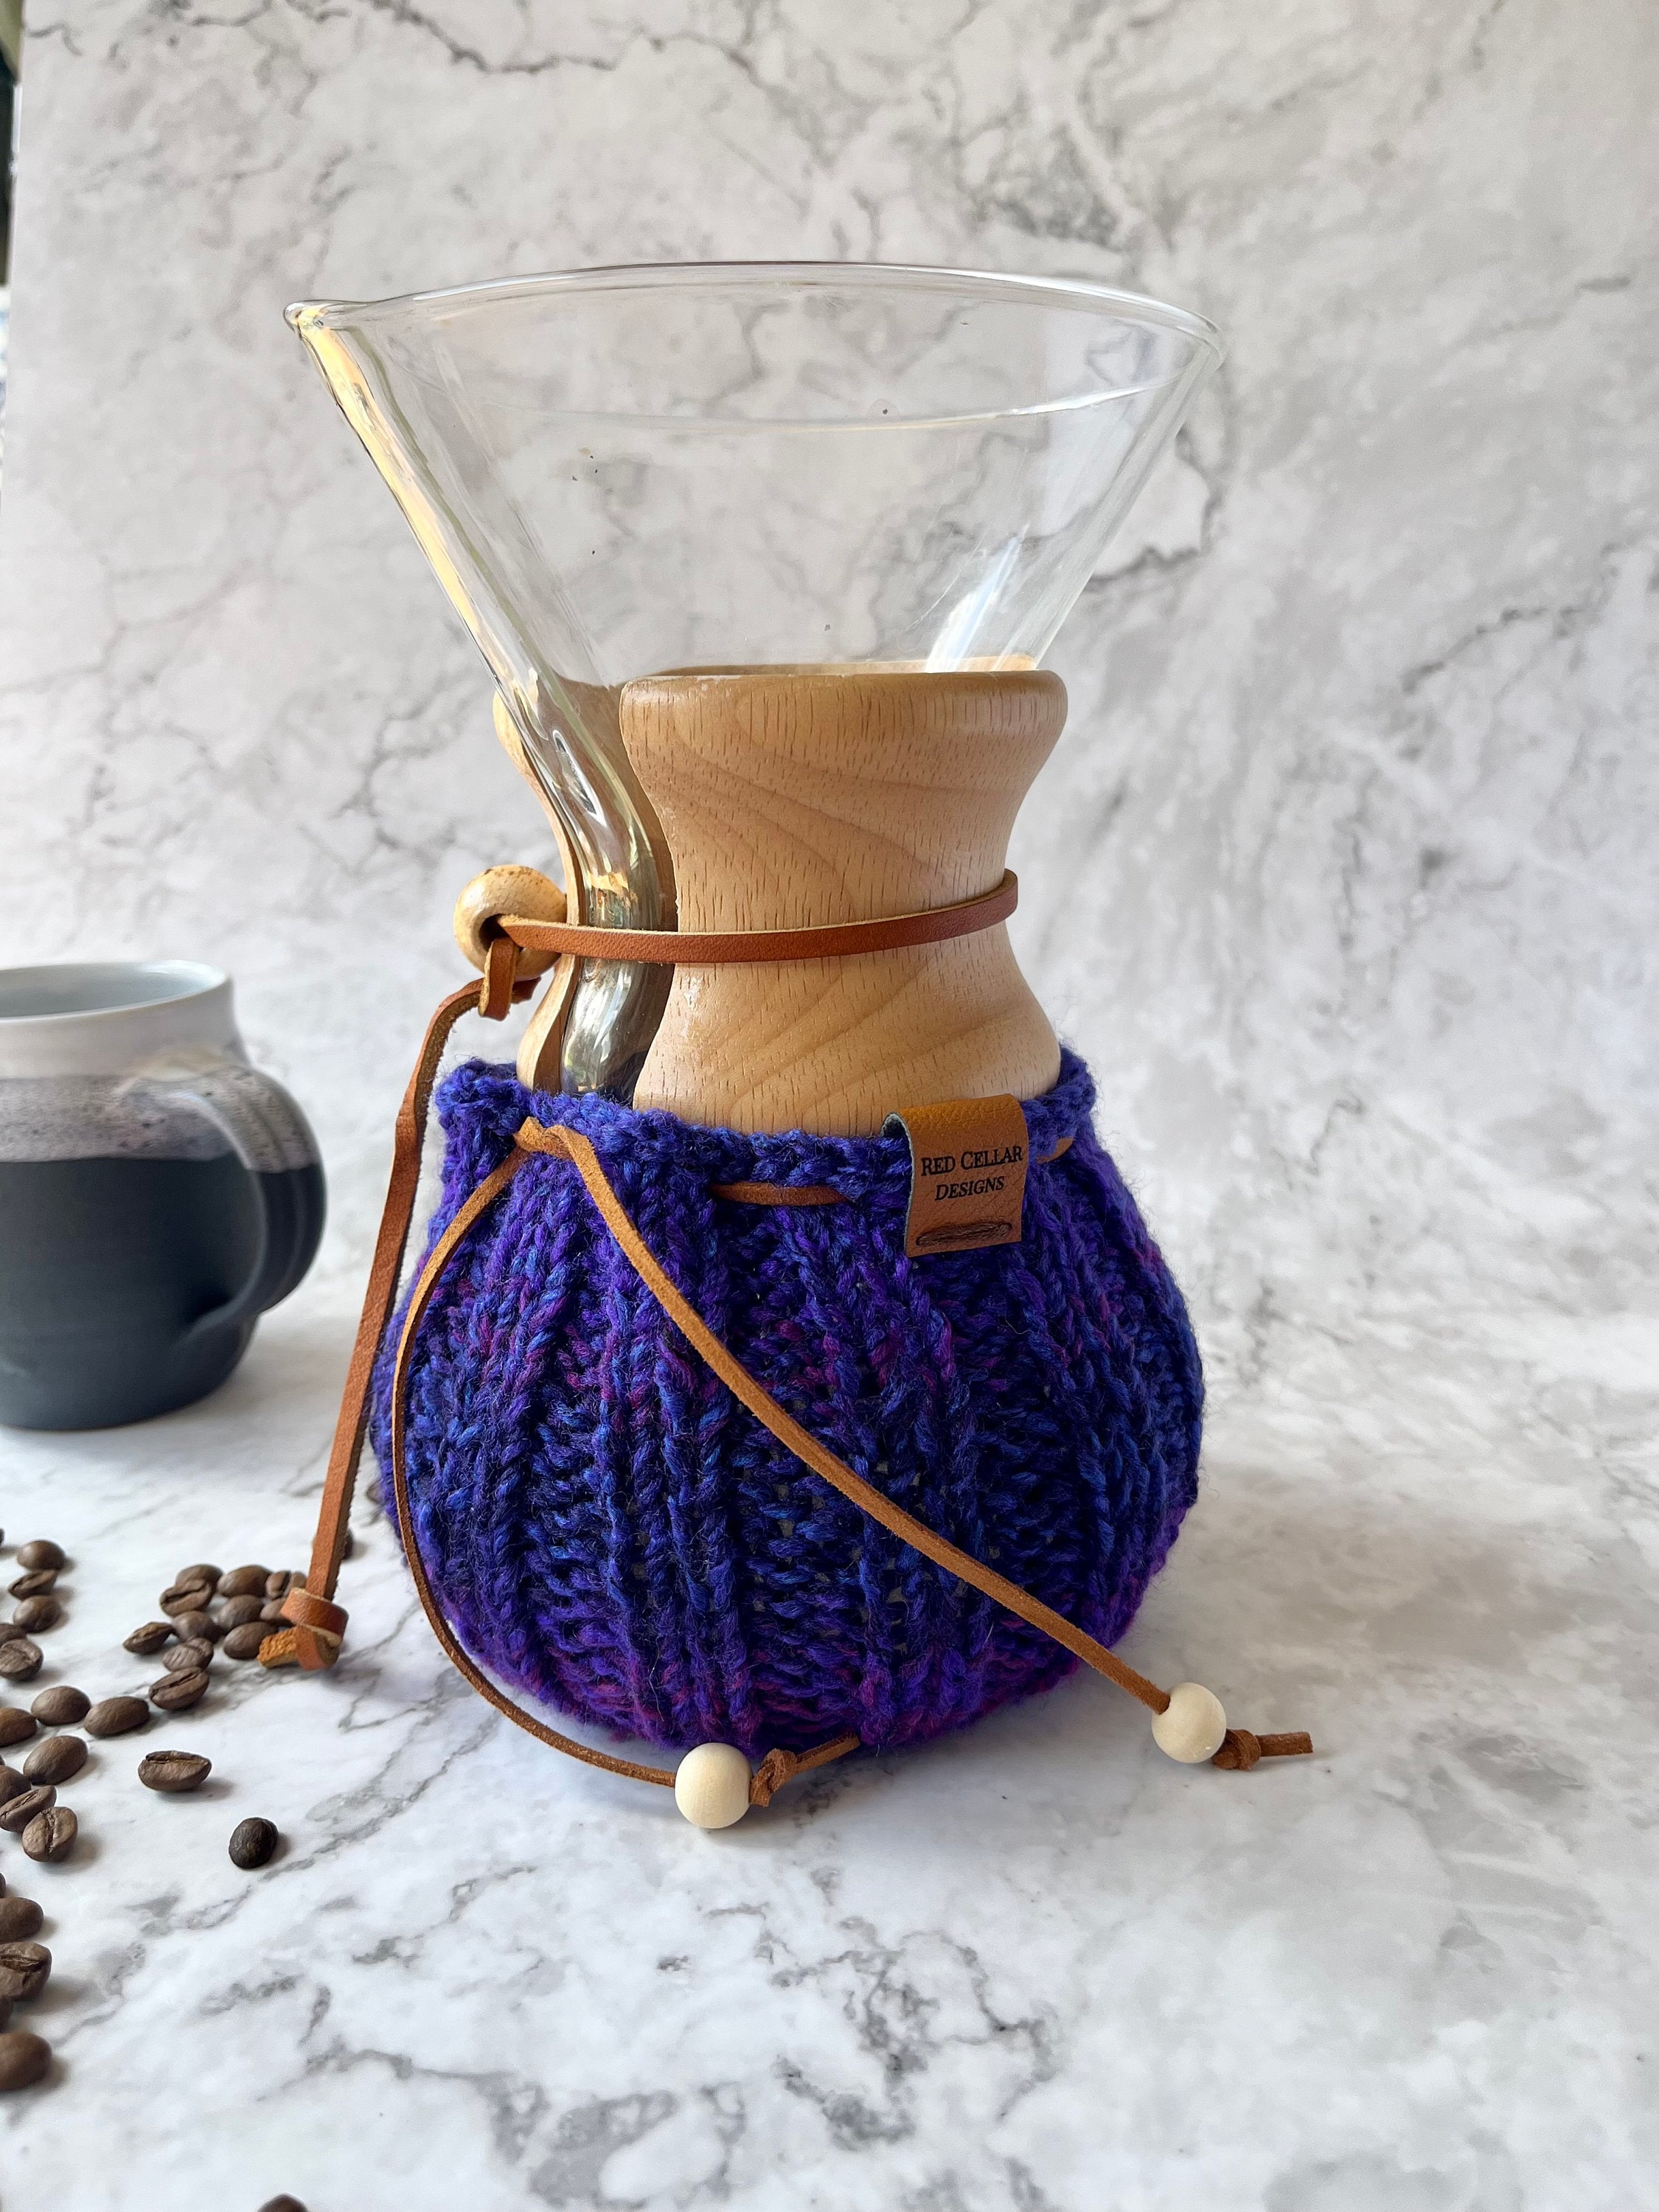 Chemex 101: How to Use & Take Care of Your Chemex